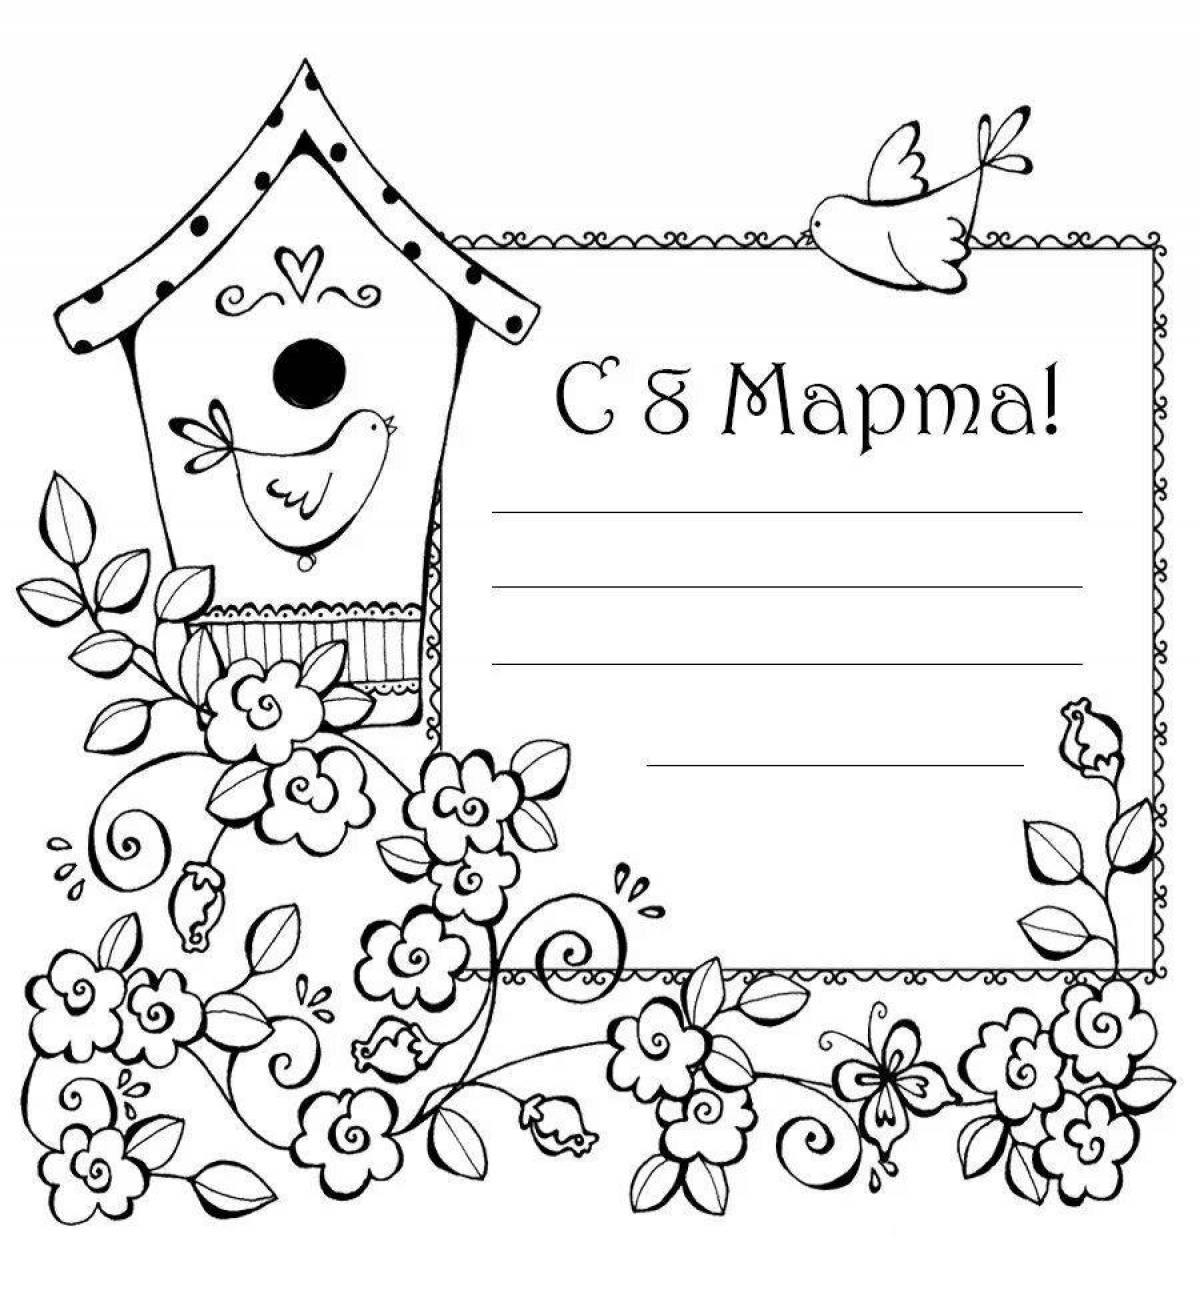 Coloring page cheerful congratulations